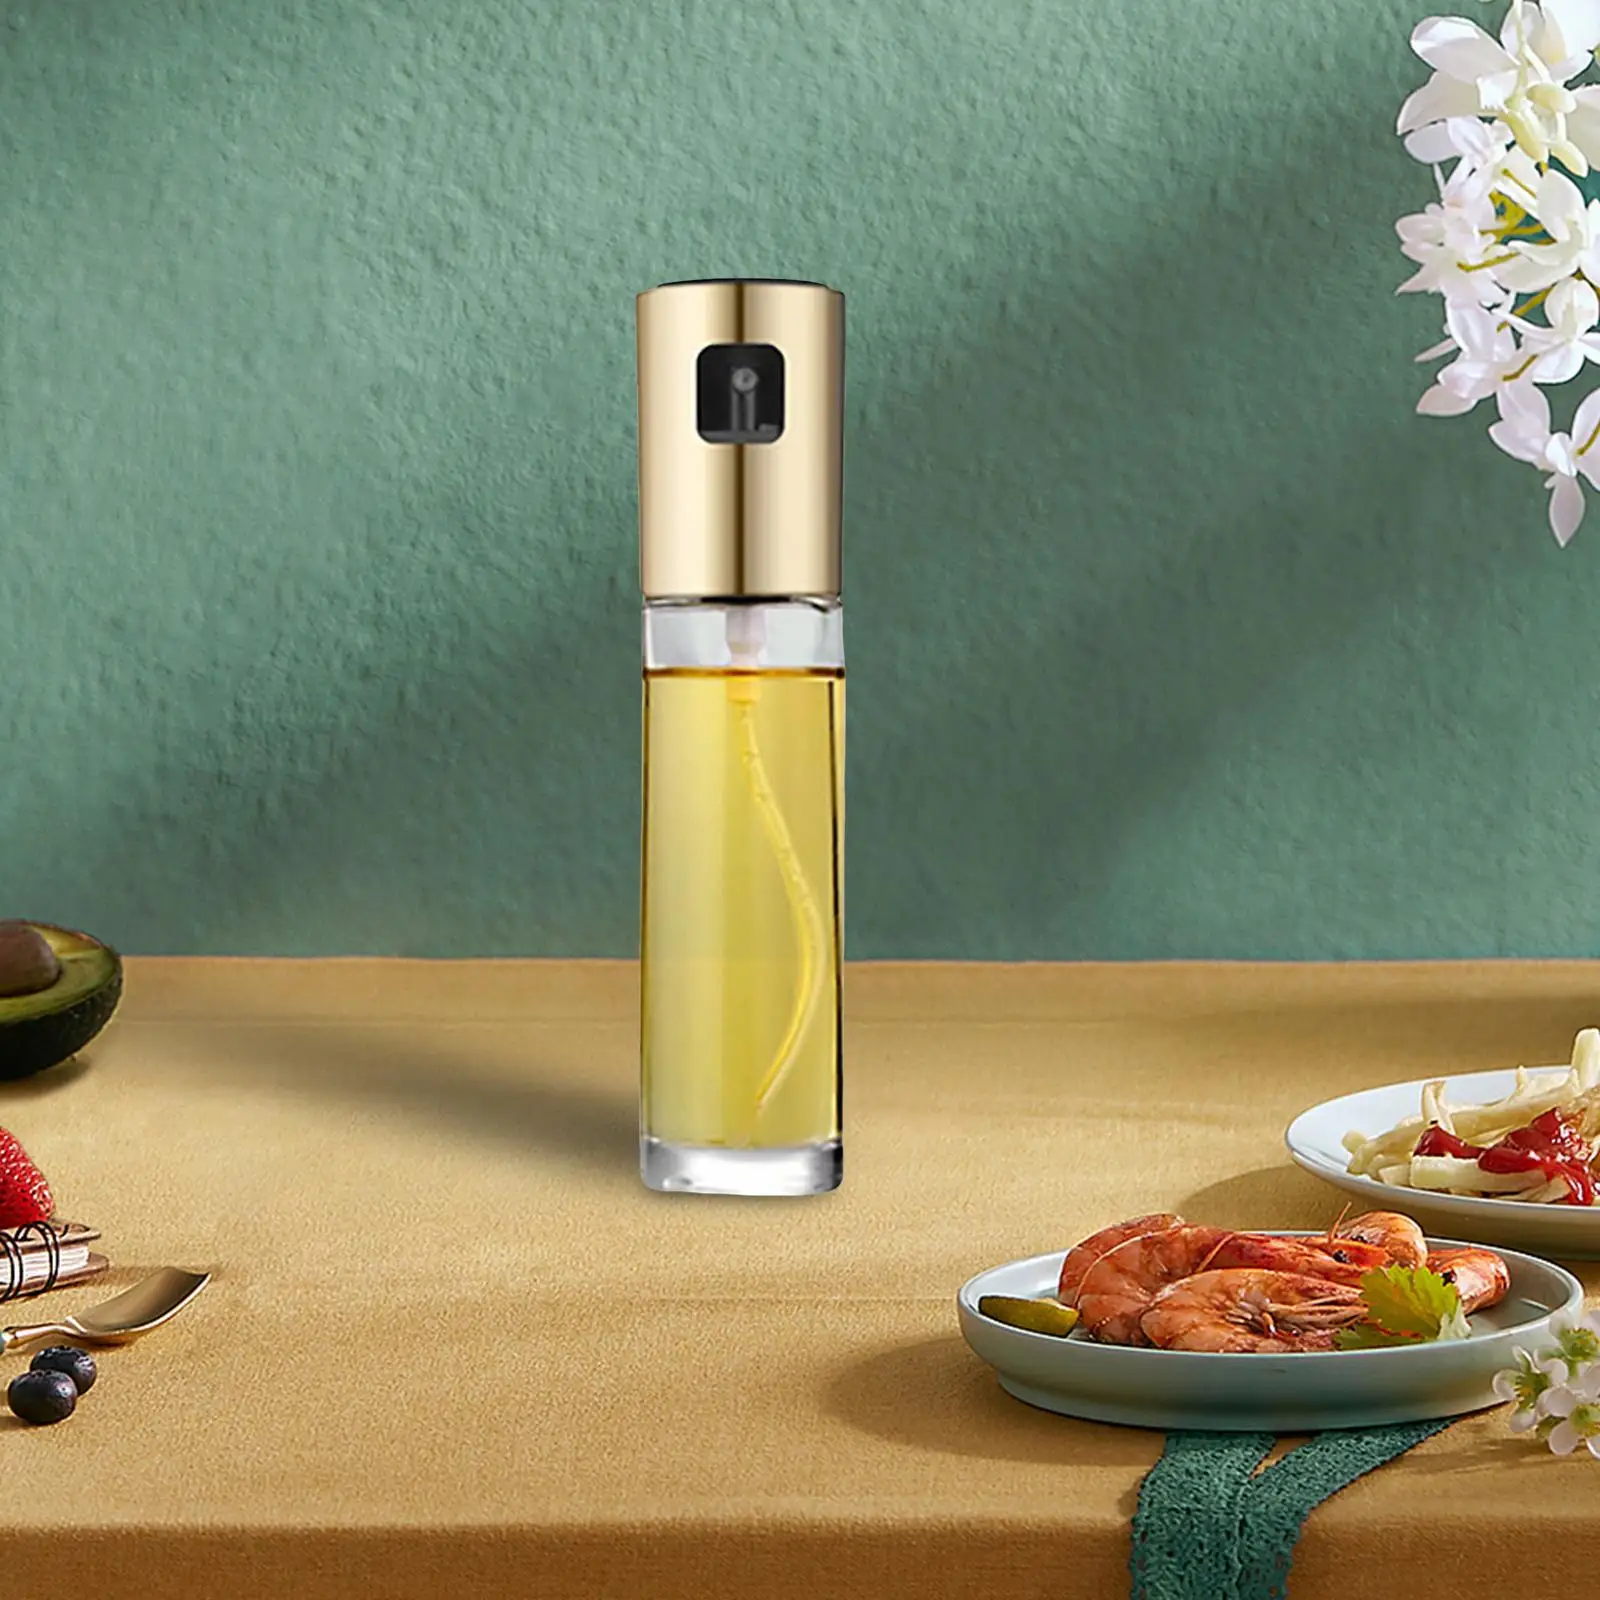 Olive Oil Sprayer Mister, Water and Liquids Sprayer, Vinegars Spray Dispensers, Olive Oil Sprayer for Barbecue